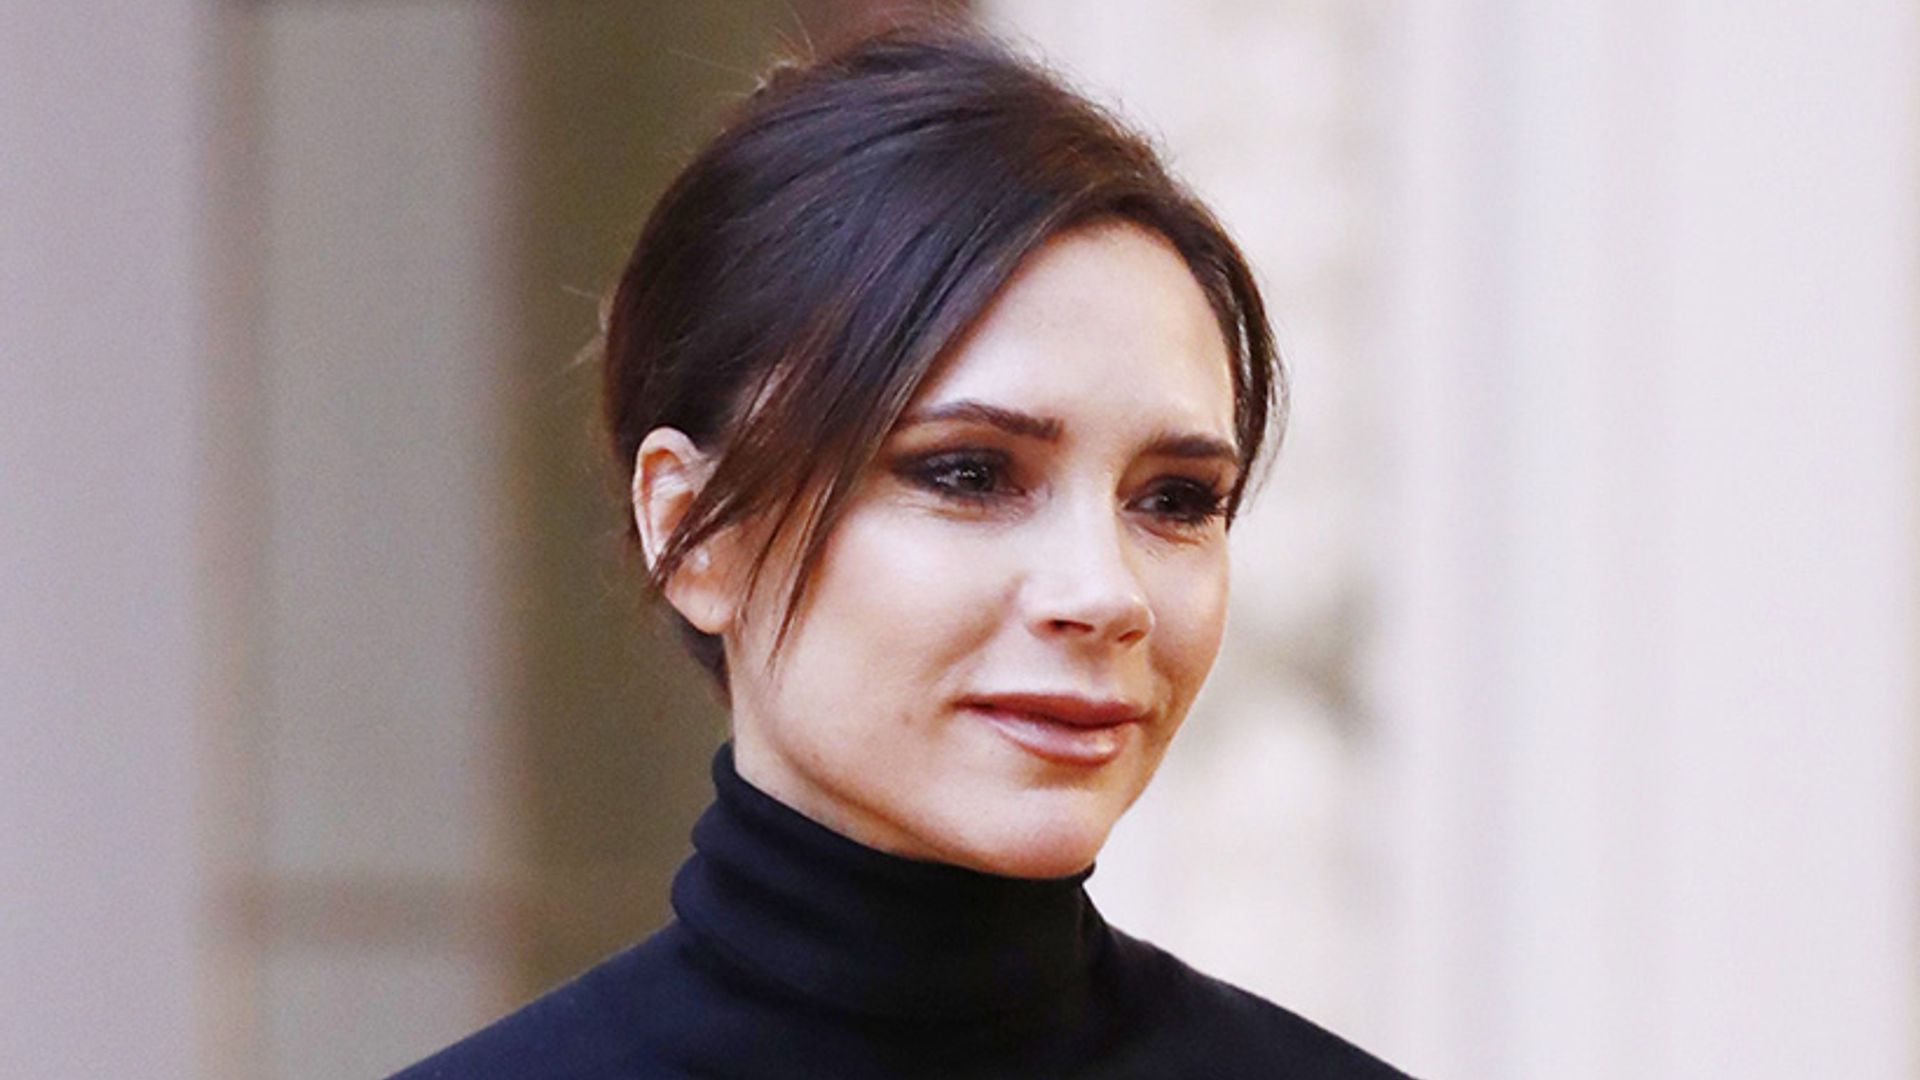 Victoria Beckham reveals her proudest moment in new interview